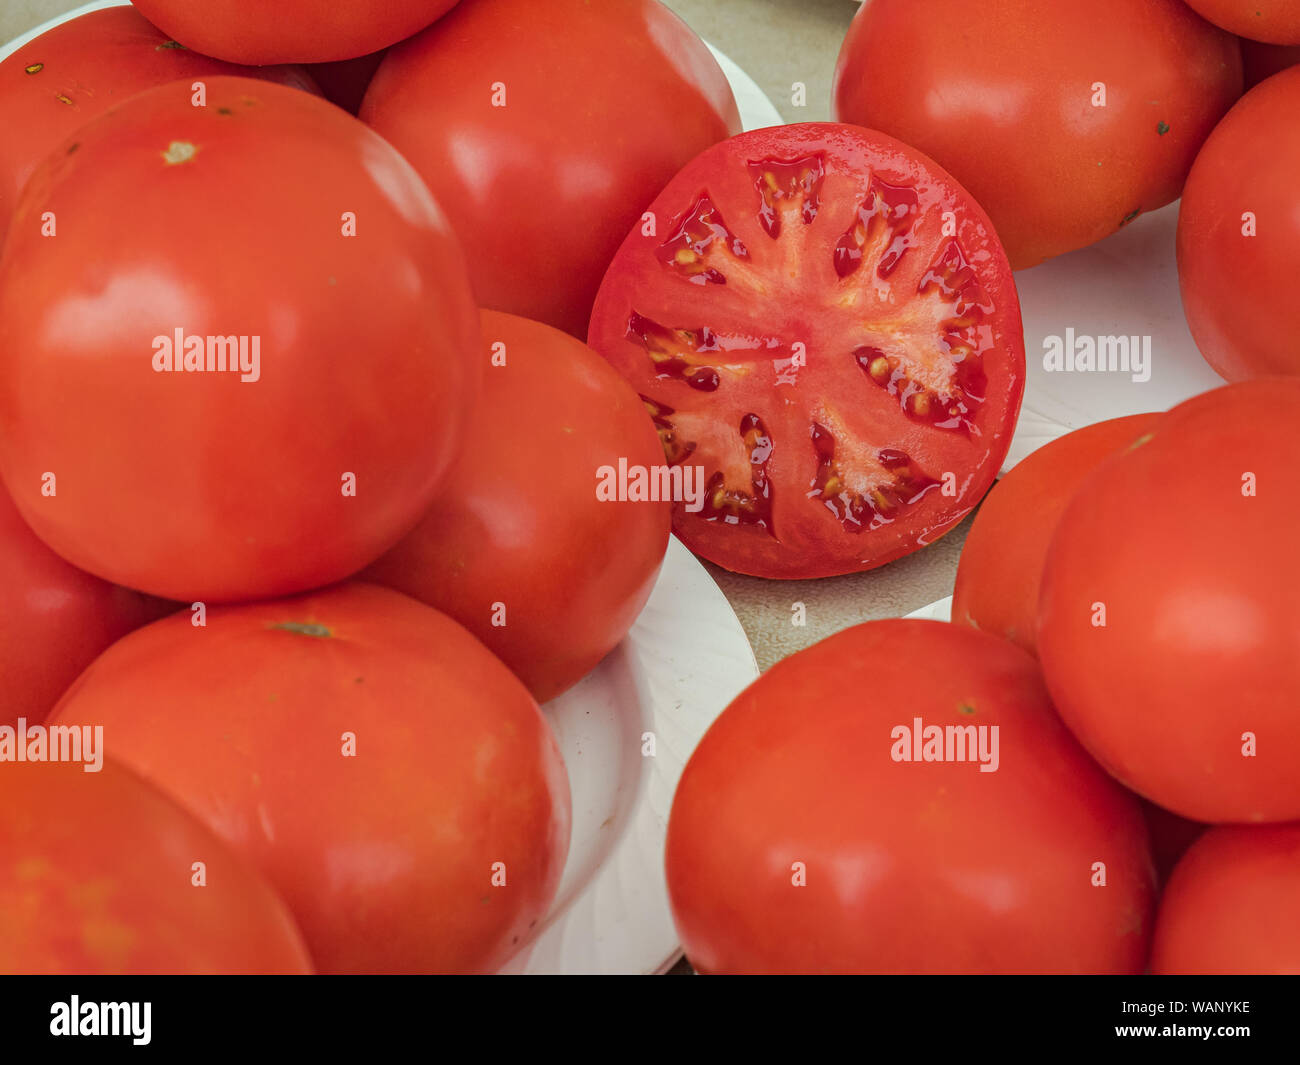 One sliced tomato on a white table with piles of  whole ripe red tomatoes. Stock Photo